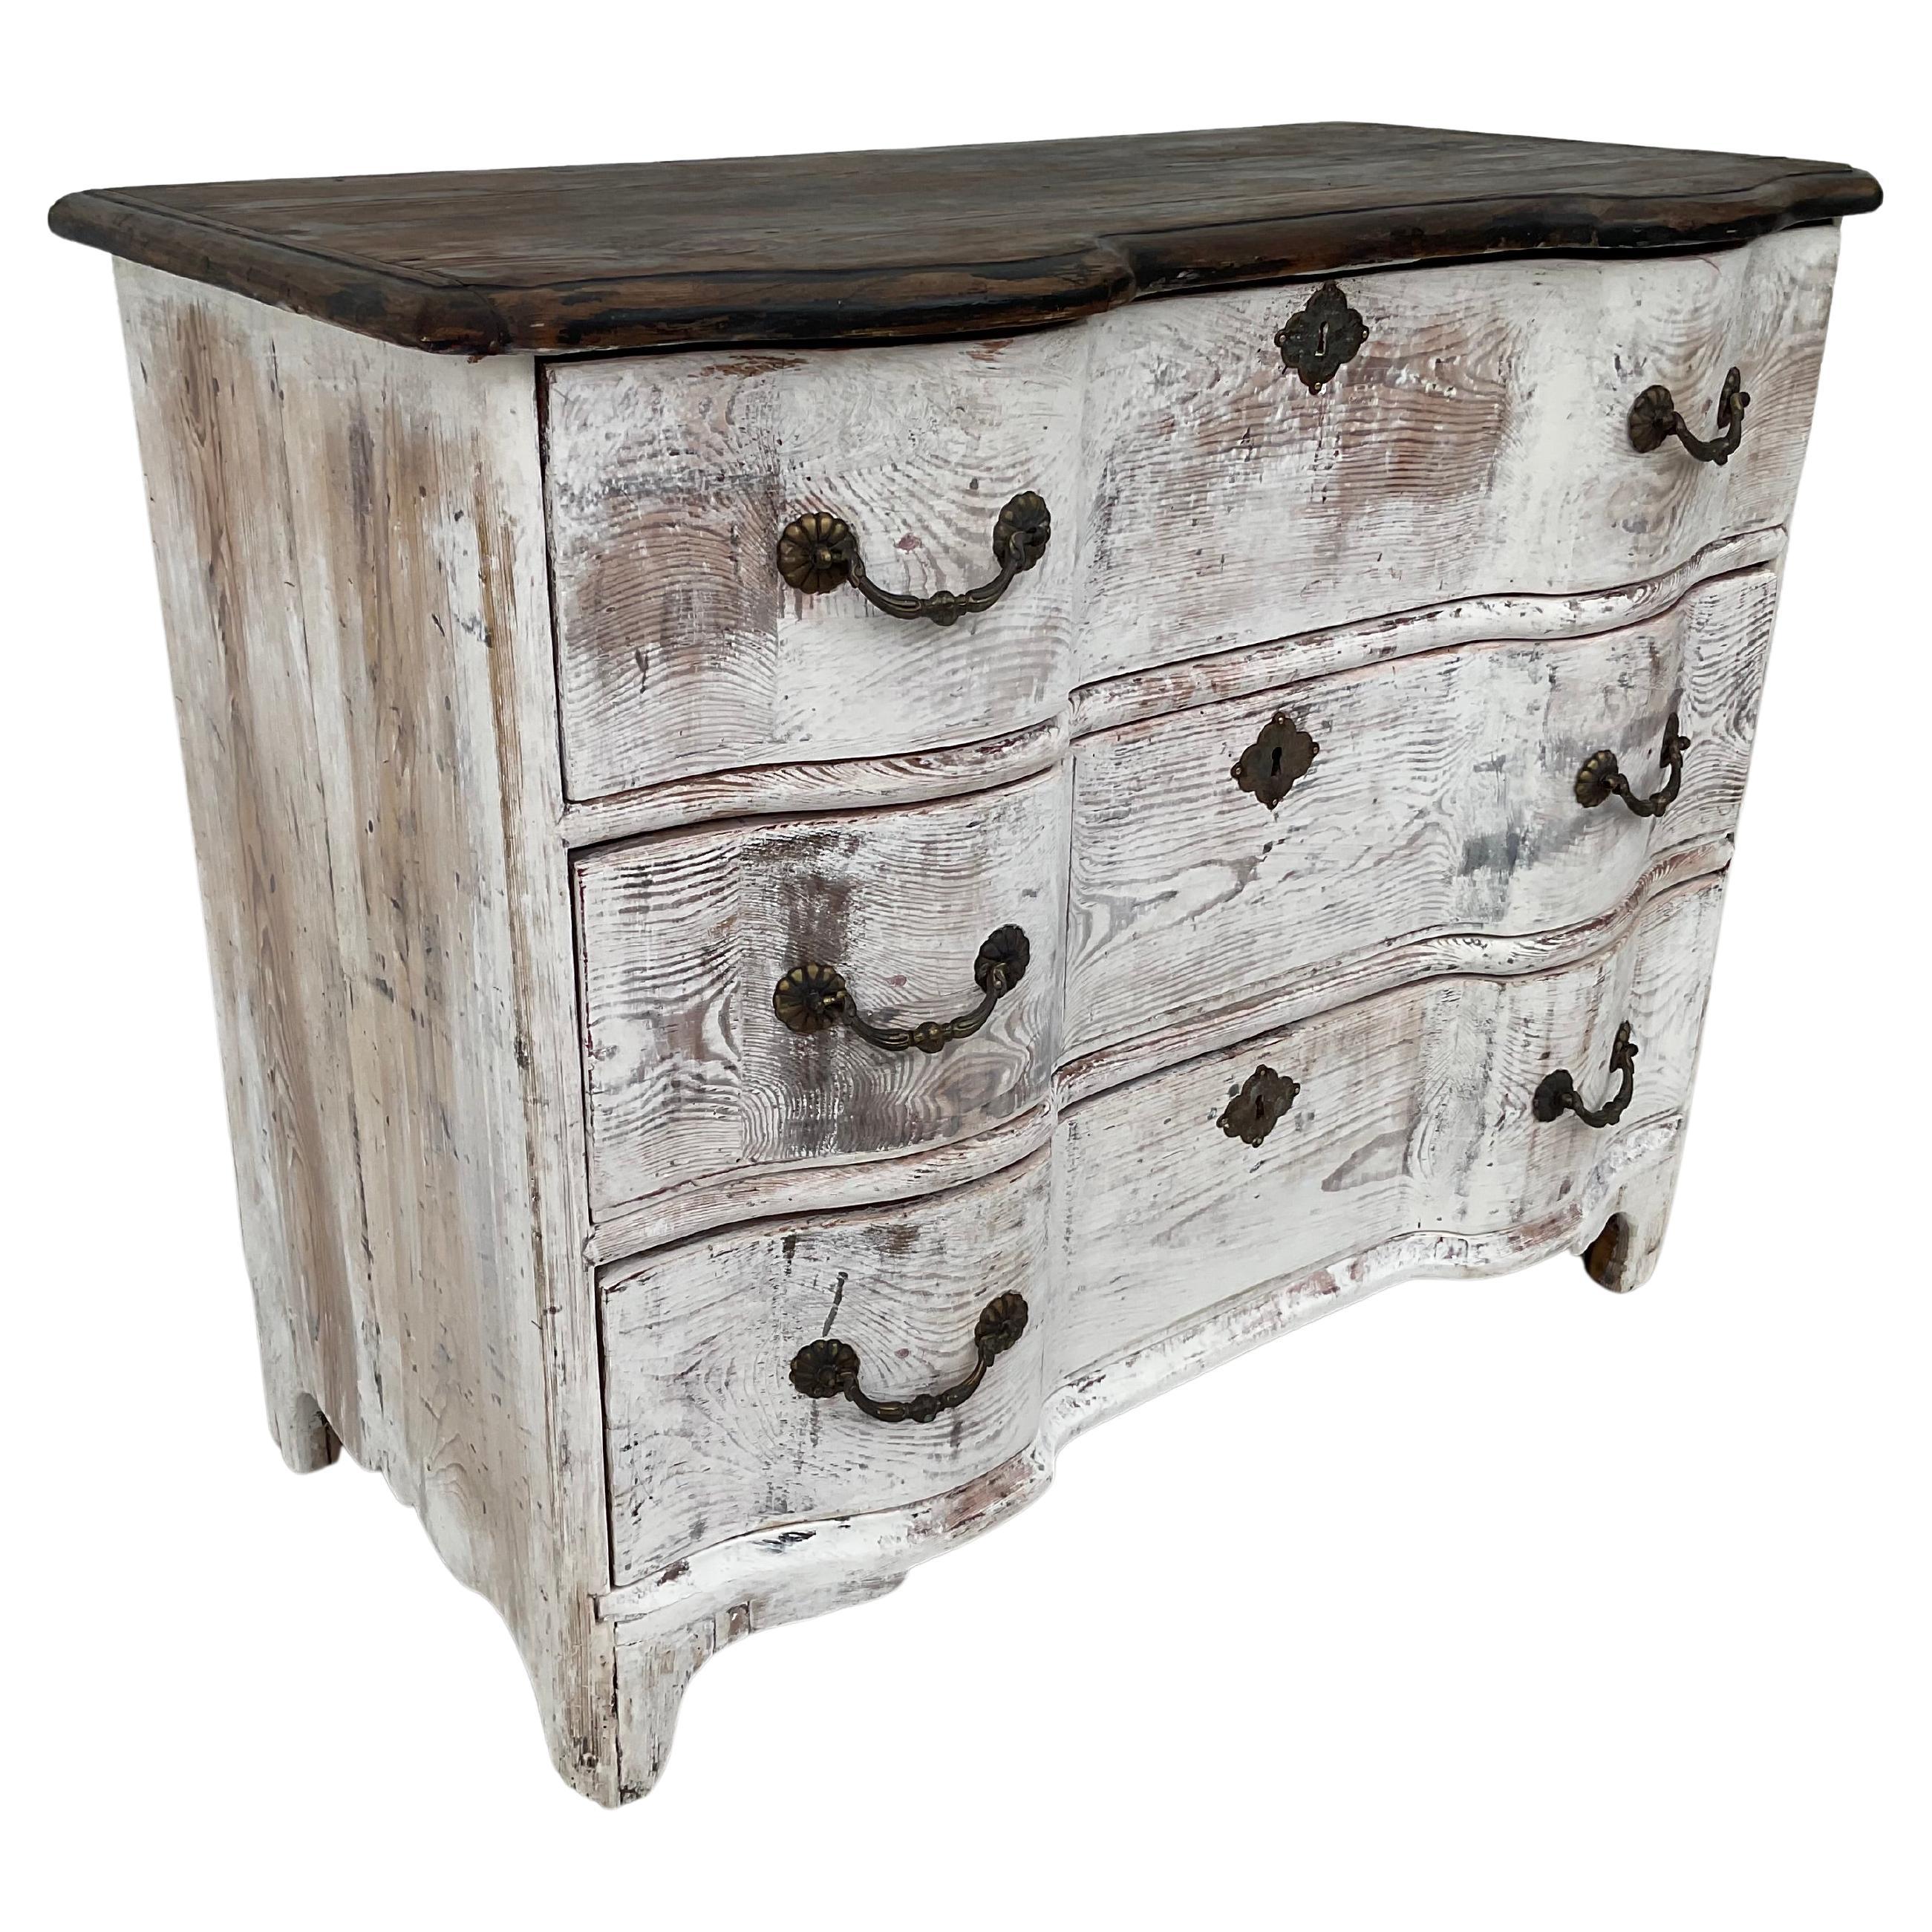 18th Century Dutch Rococo Period Serpentine Front Painted Commode